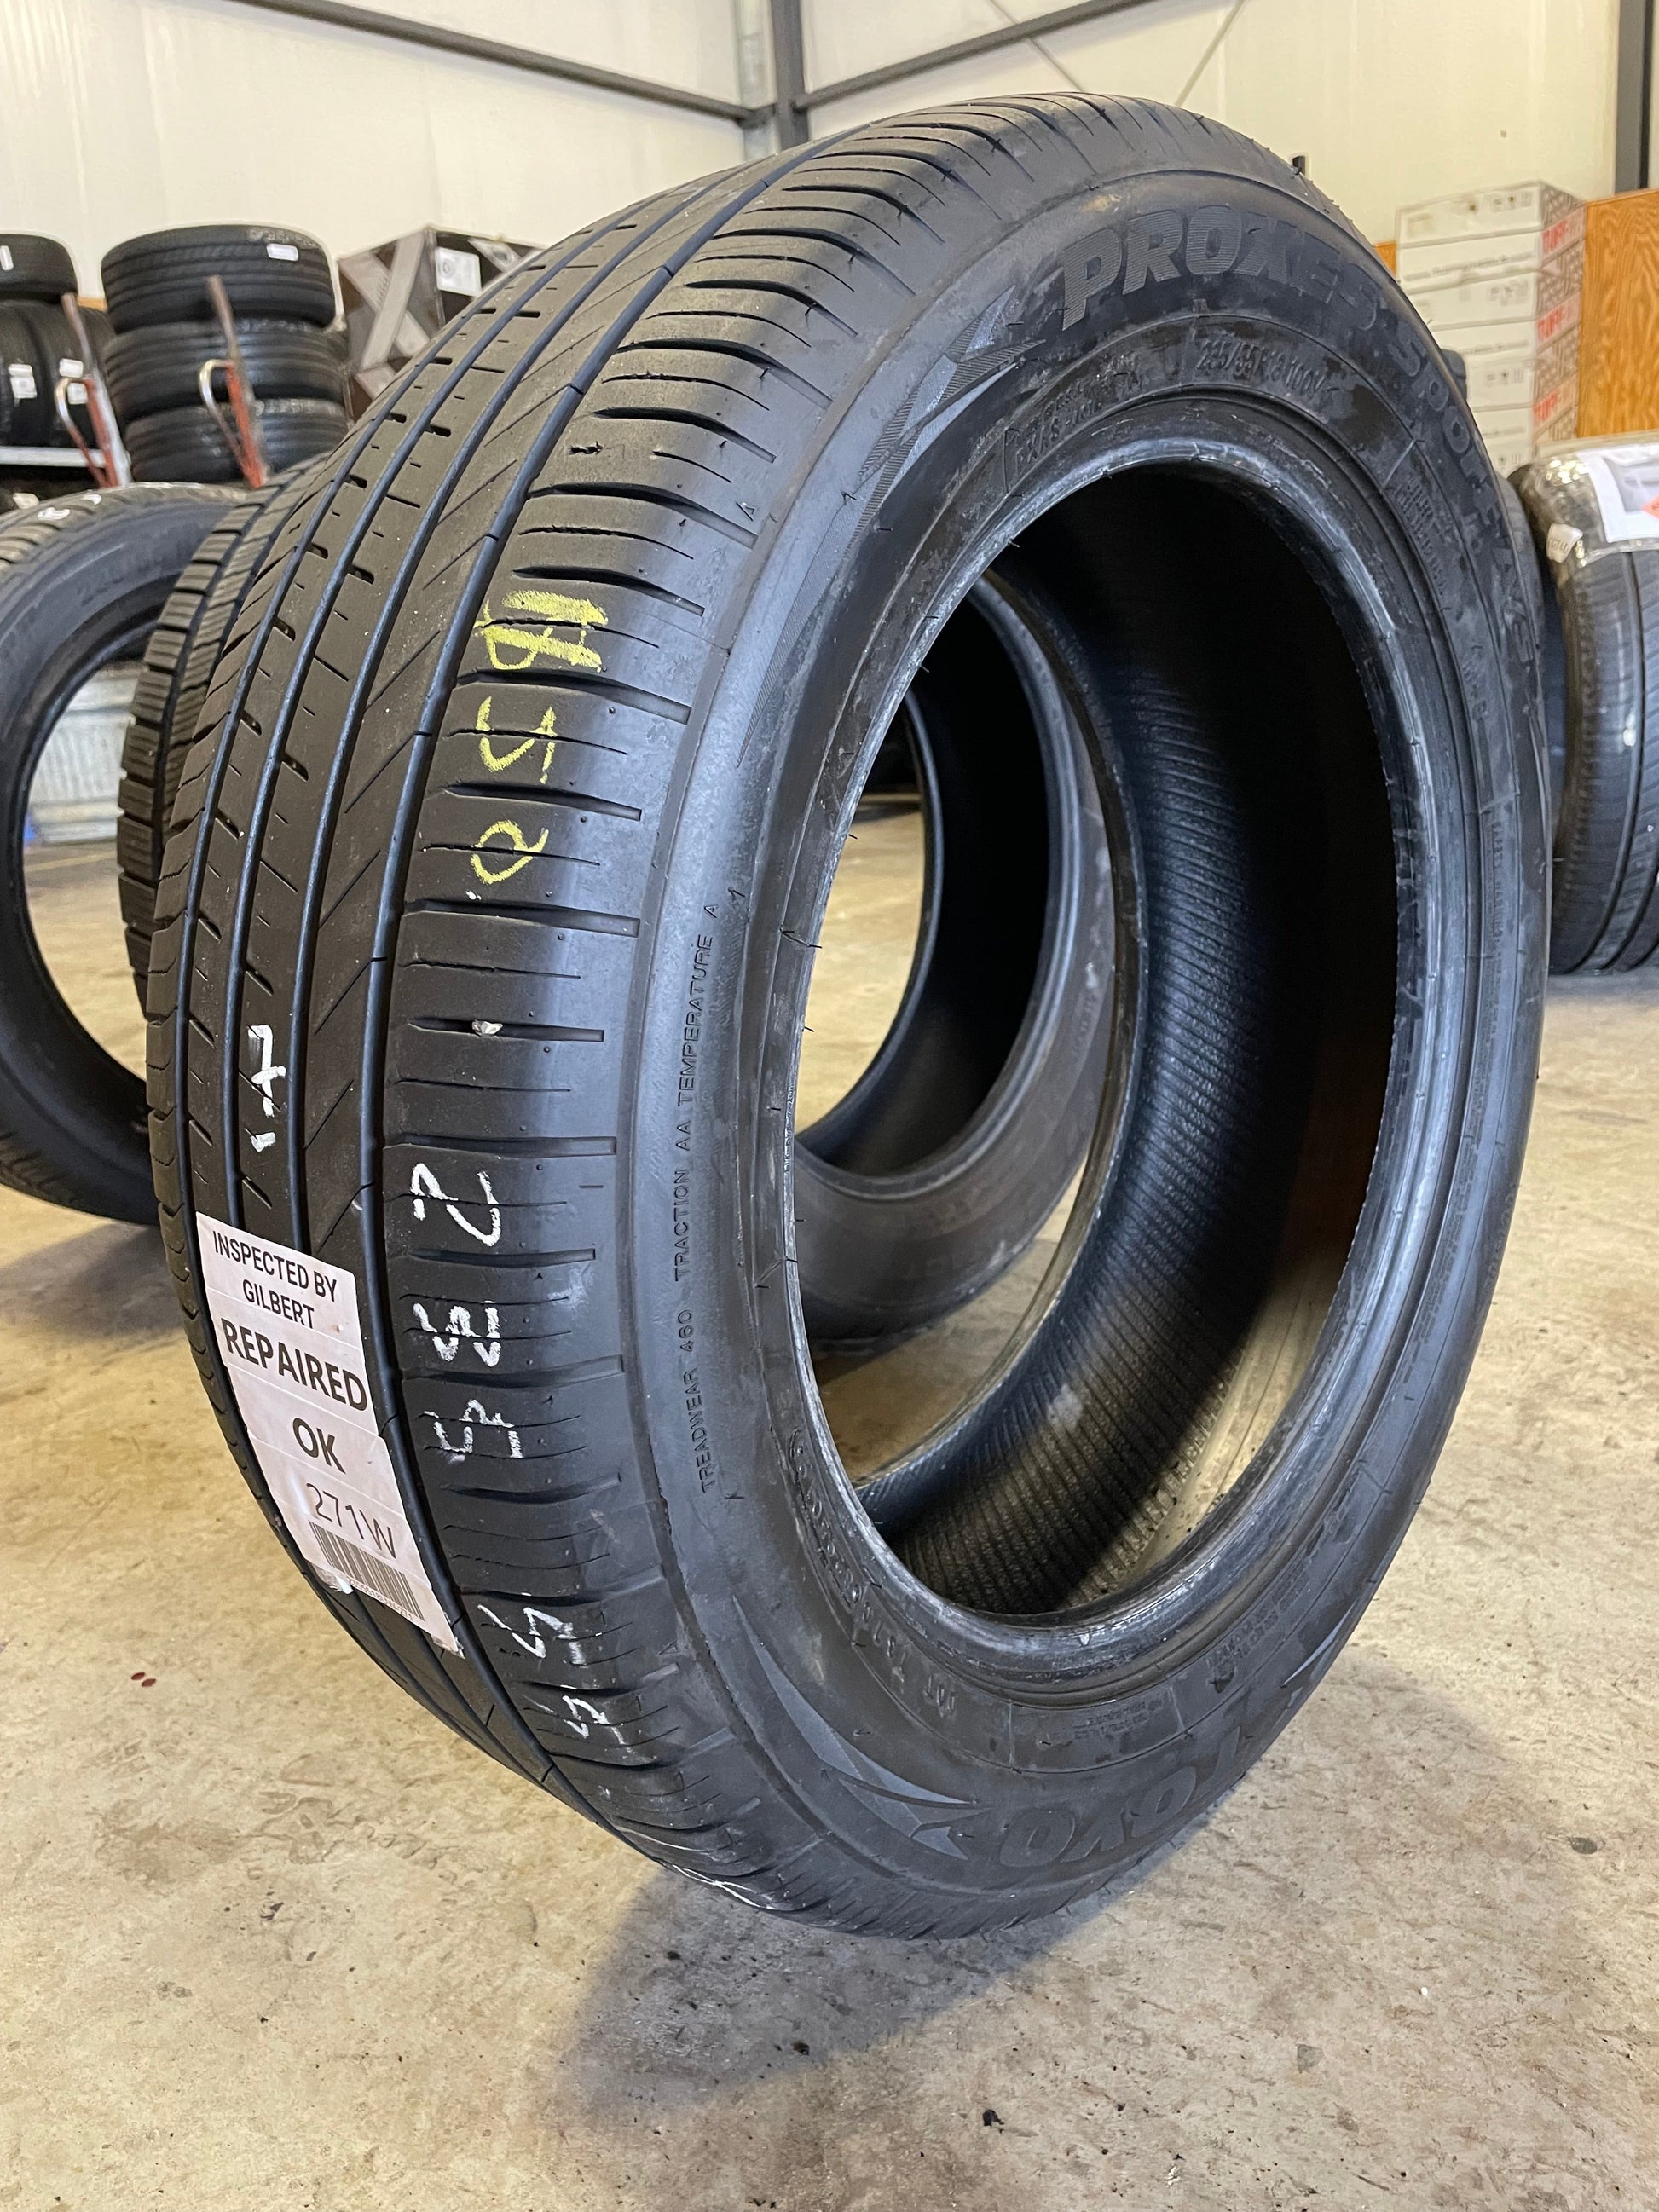 SINGLE 235/55R18 Toyo Proxes Sport A/S 100 V SL - Used Tires